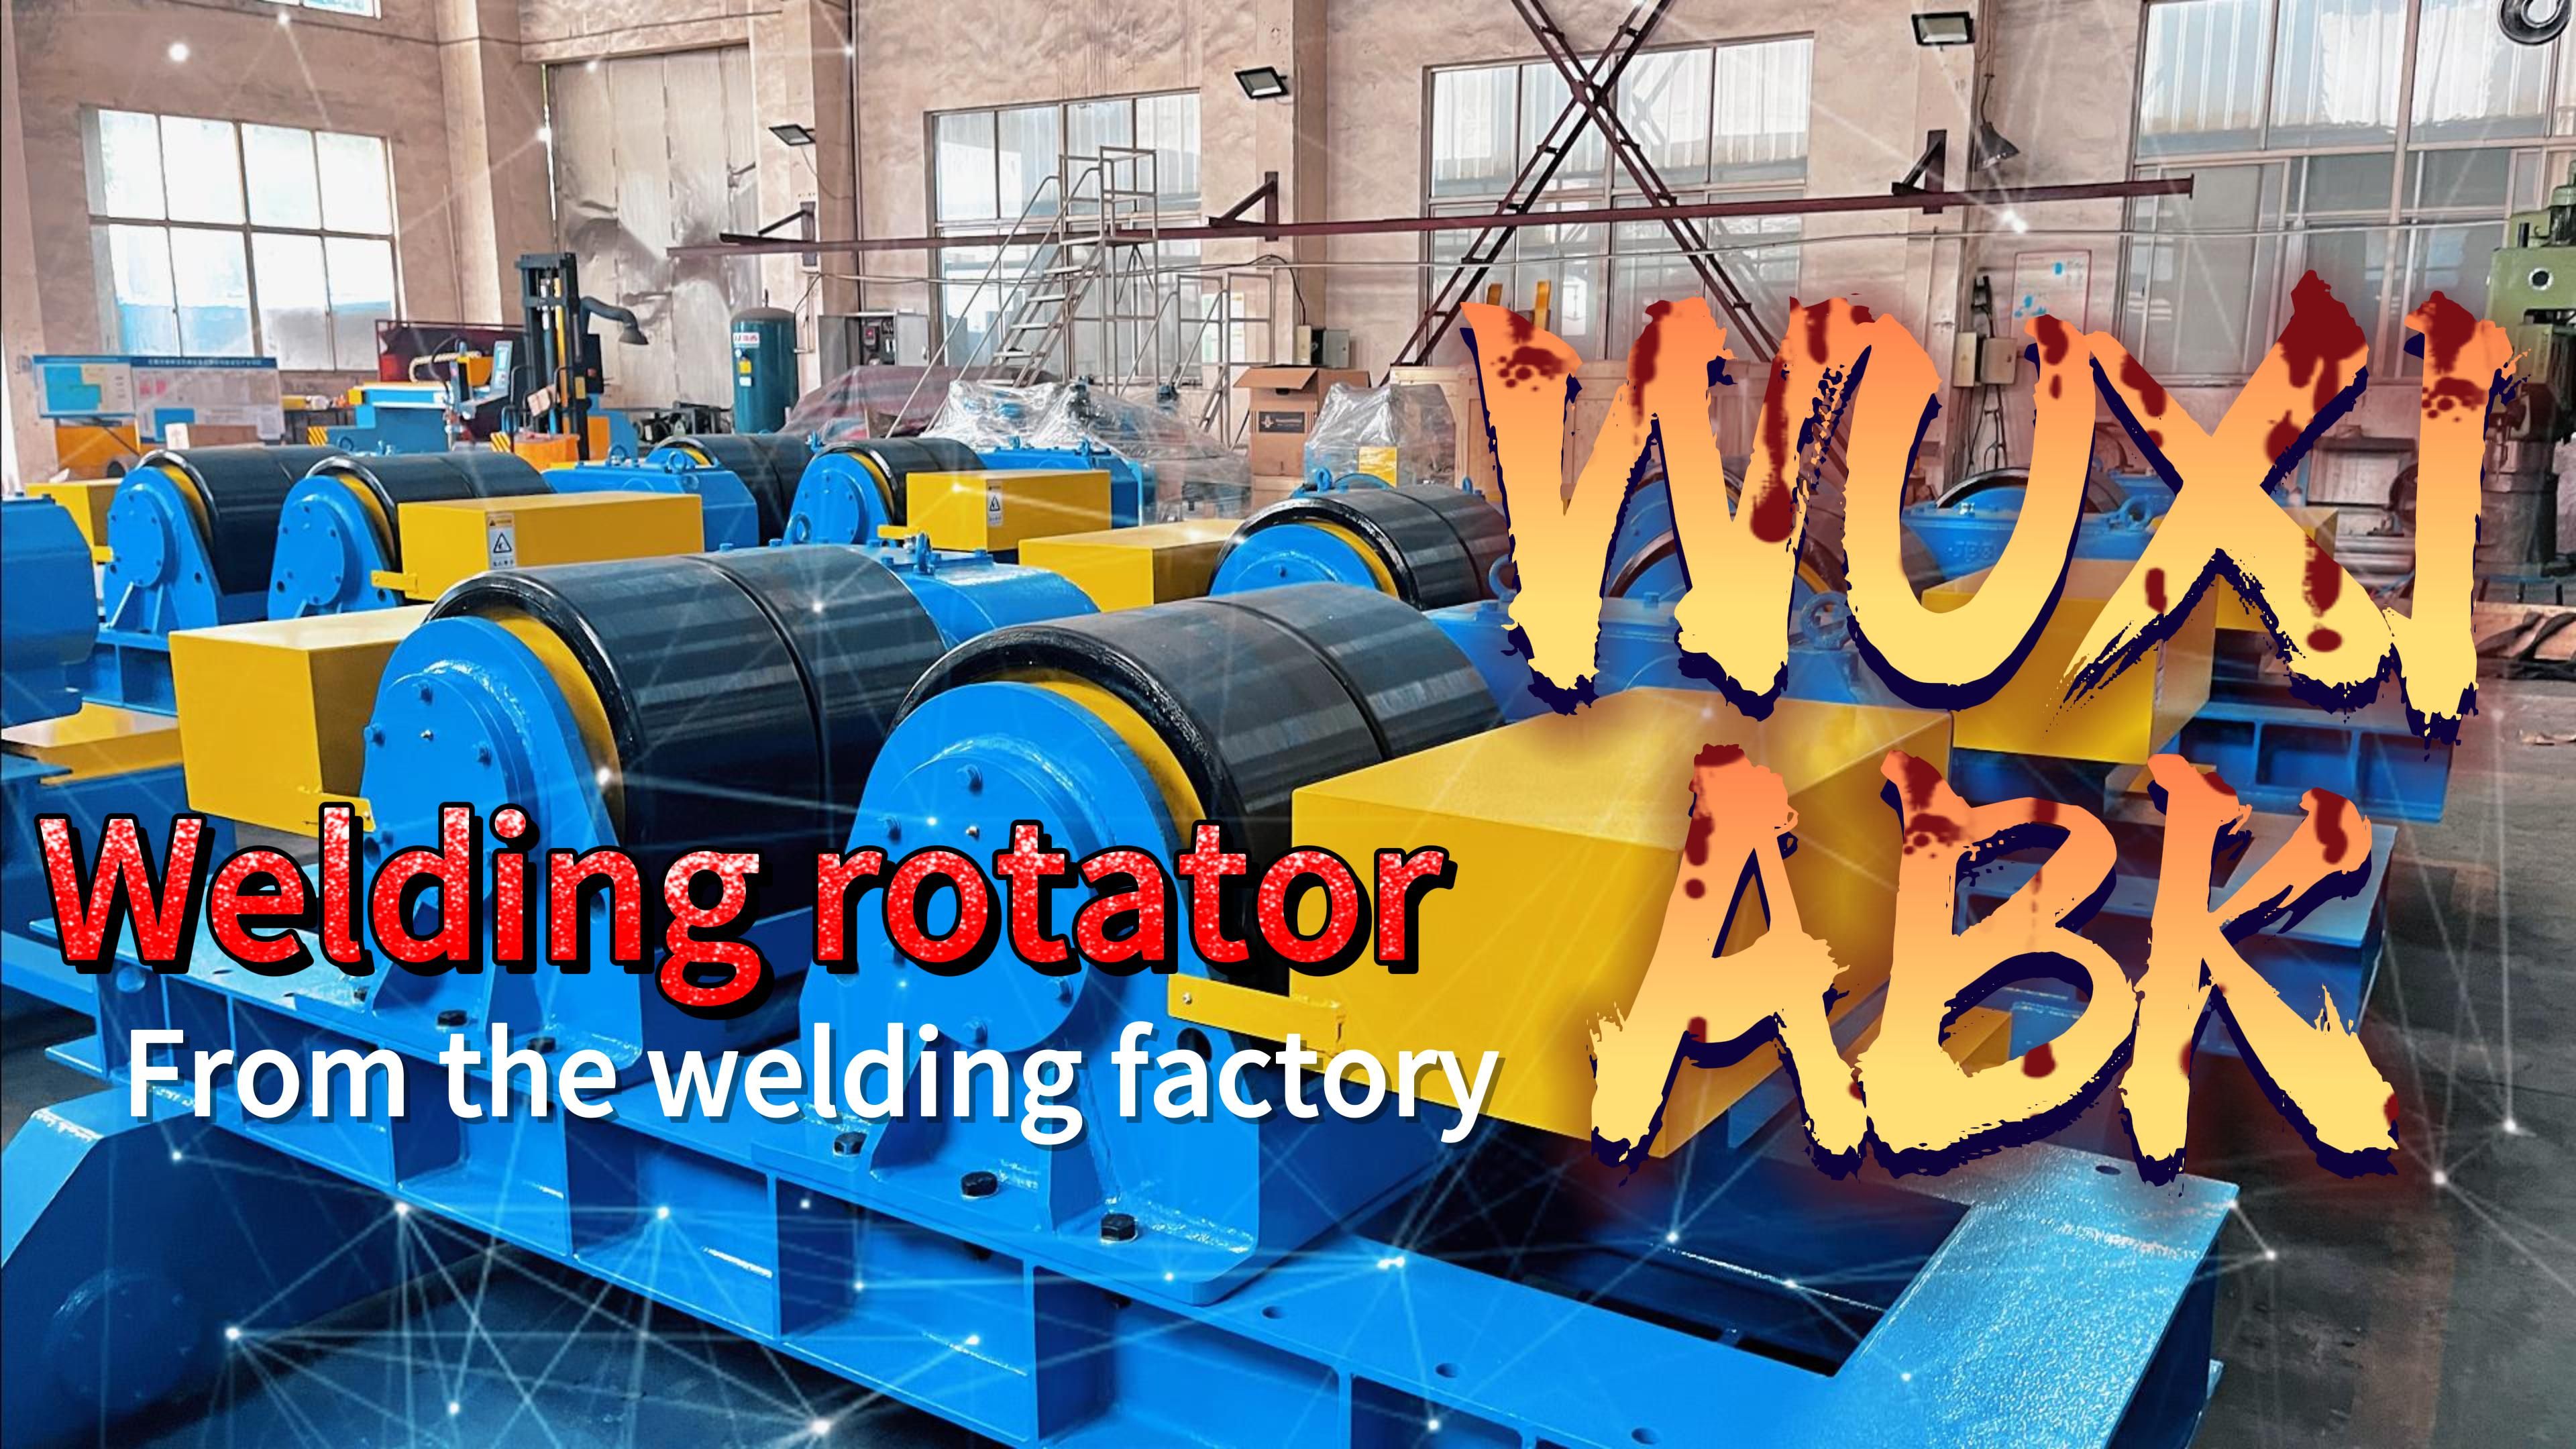 Towards a new era of welding: how to improve production safety and efficiency by using welding turntable